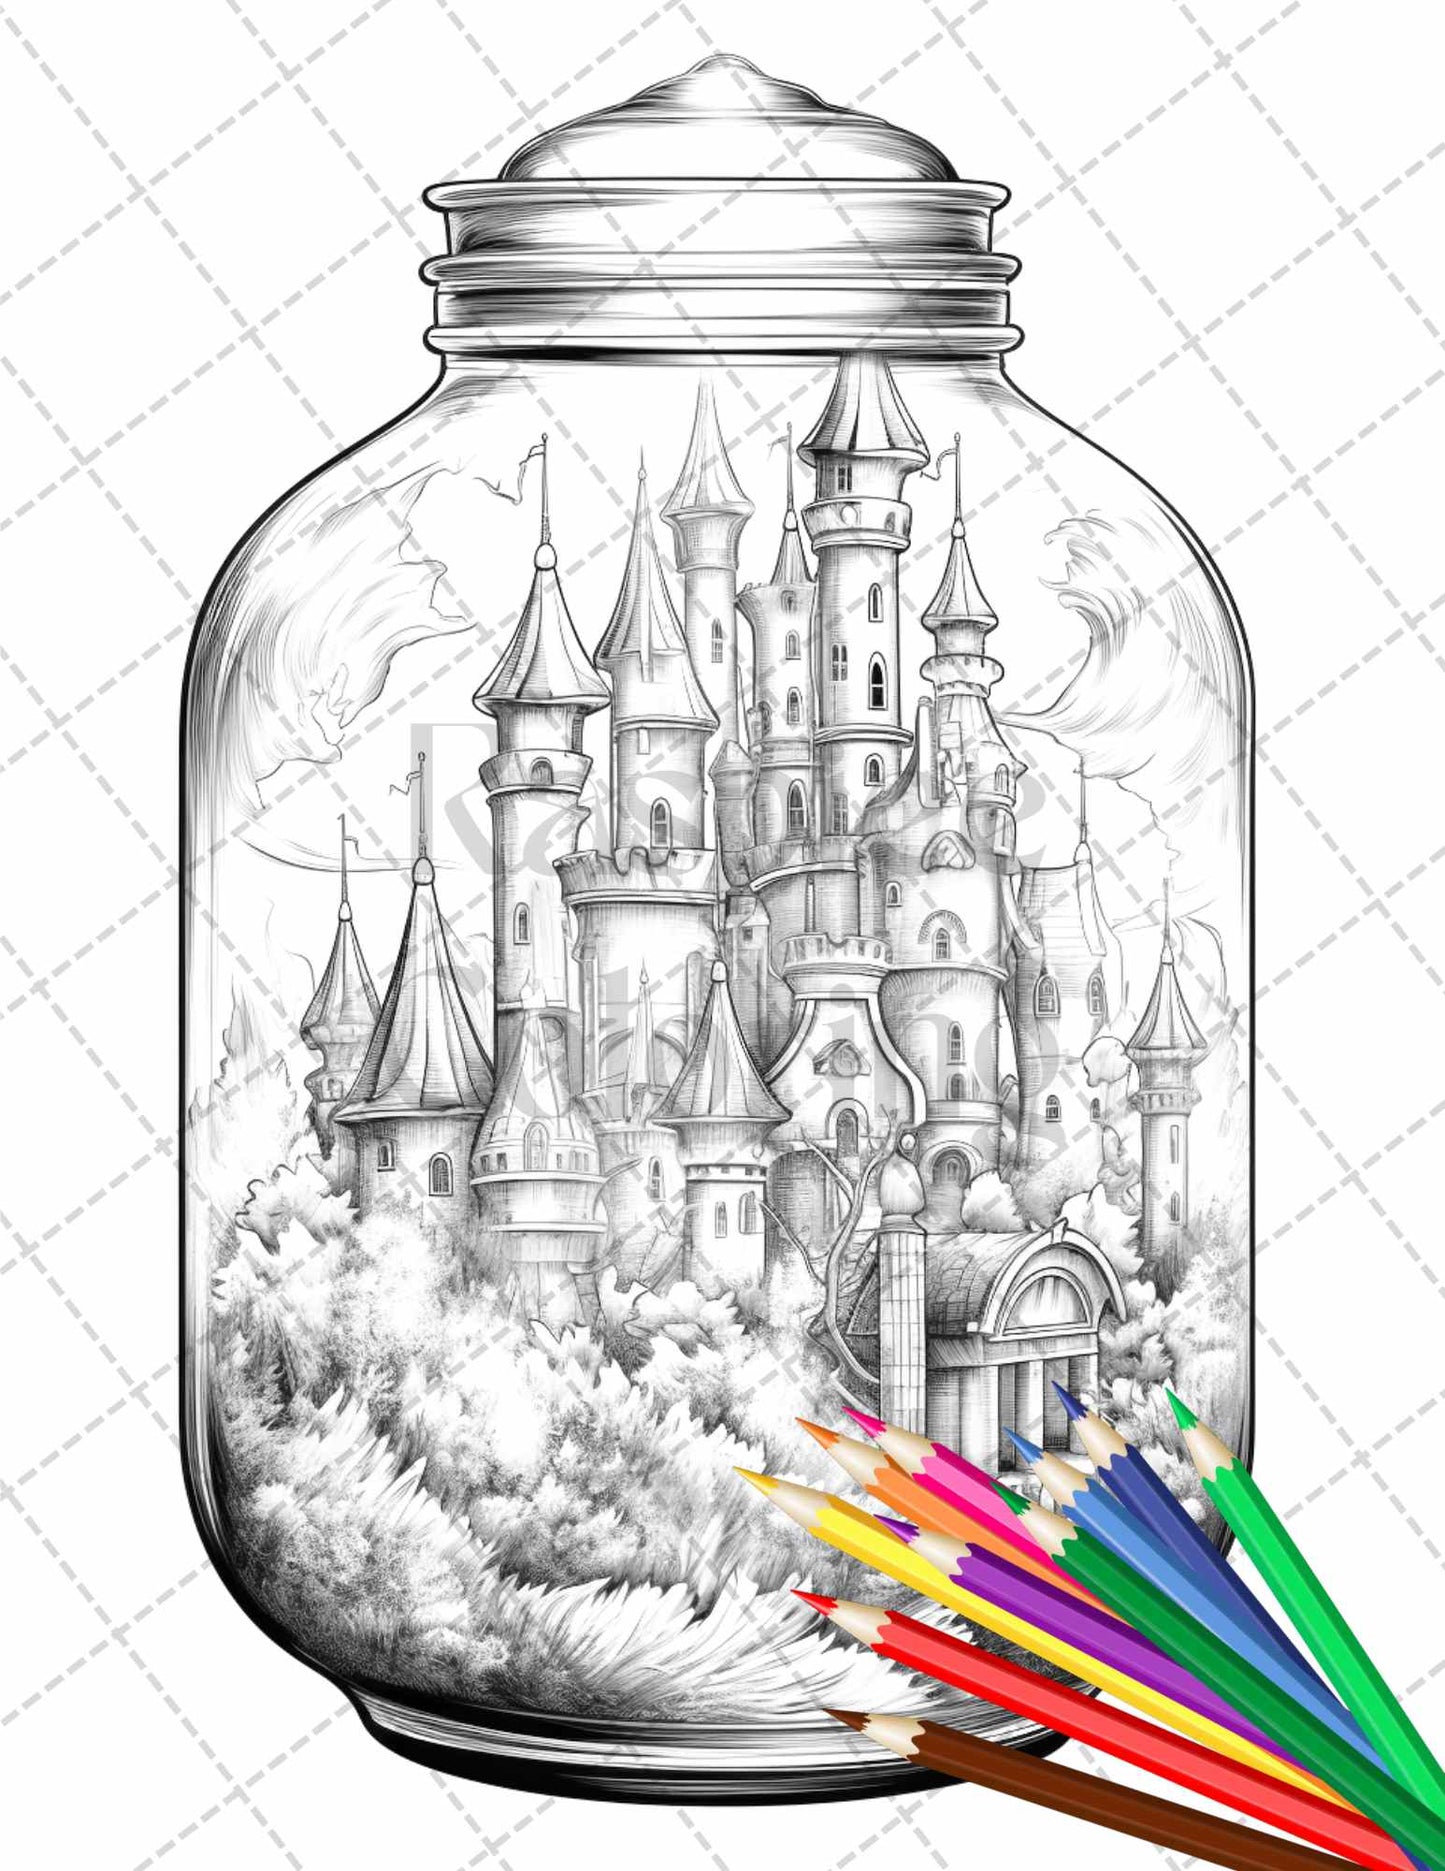 42 Fantasy Castle In Jar Grayscale Coloring Pages Printable for Adults, PDF File Instant Download - raspiee